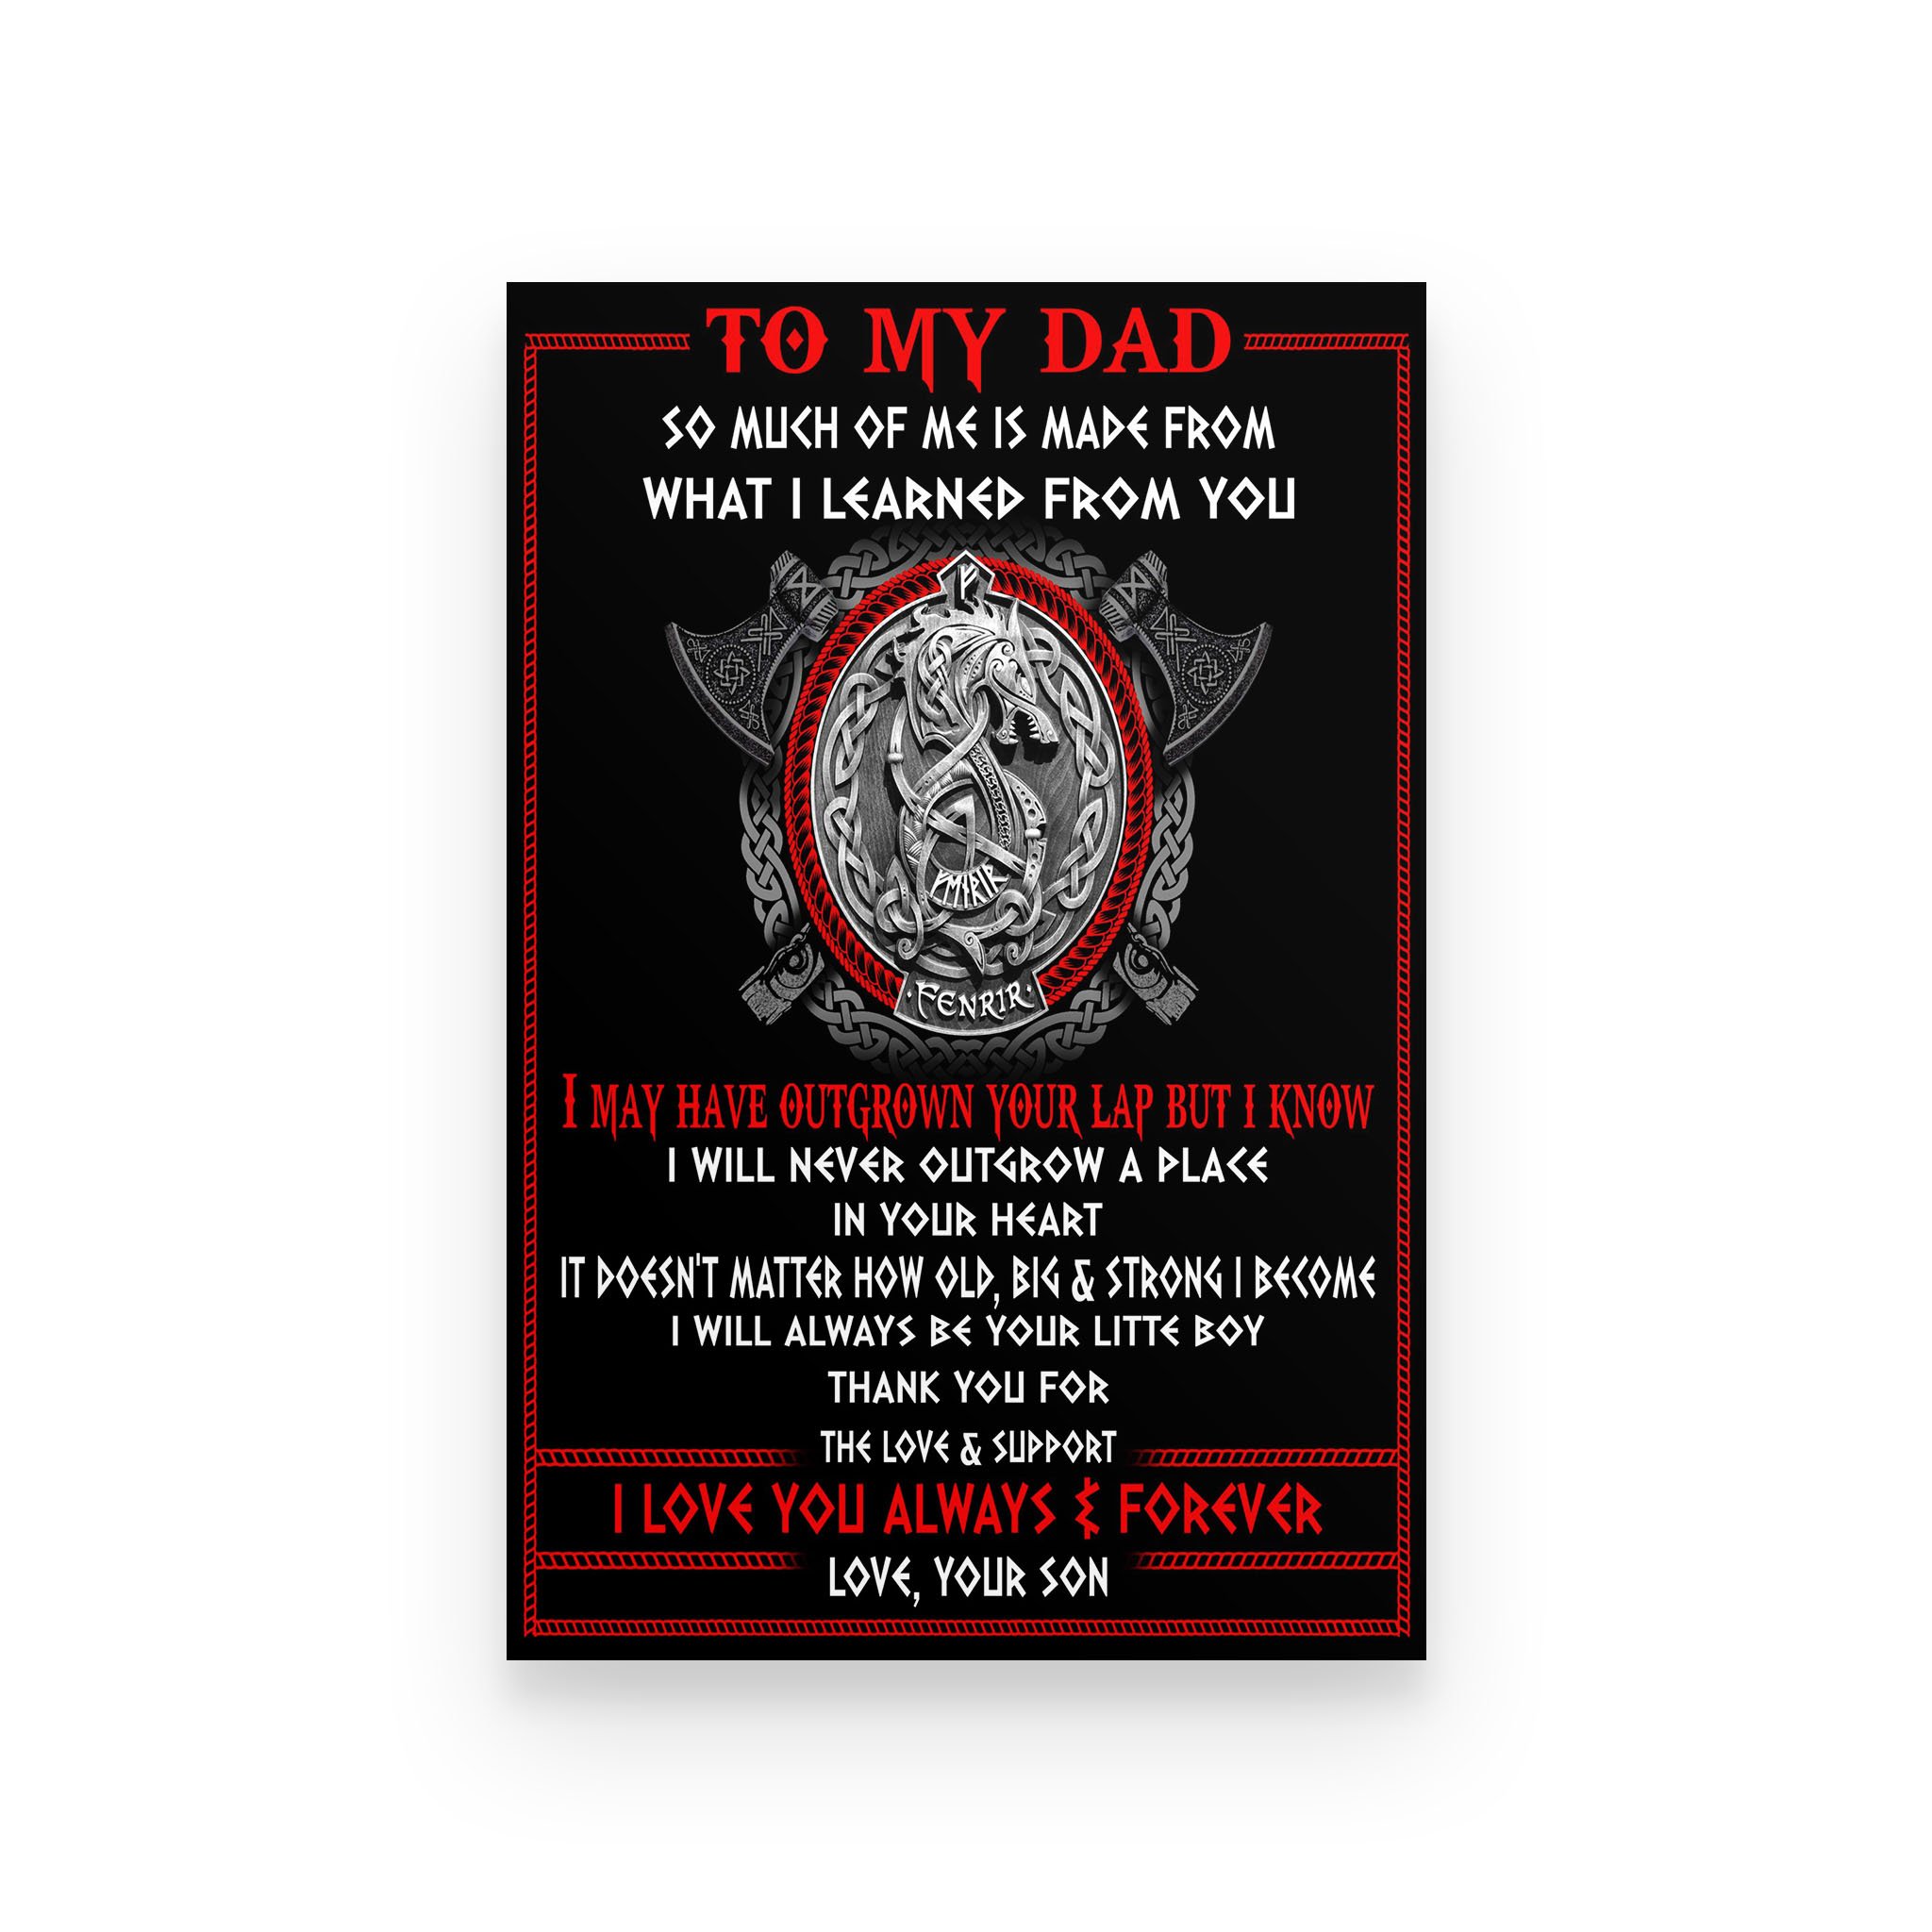 Viking poster son to dad  so much of me is made from what i learned from you